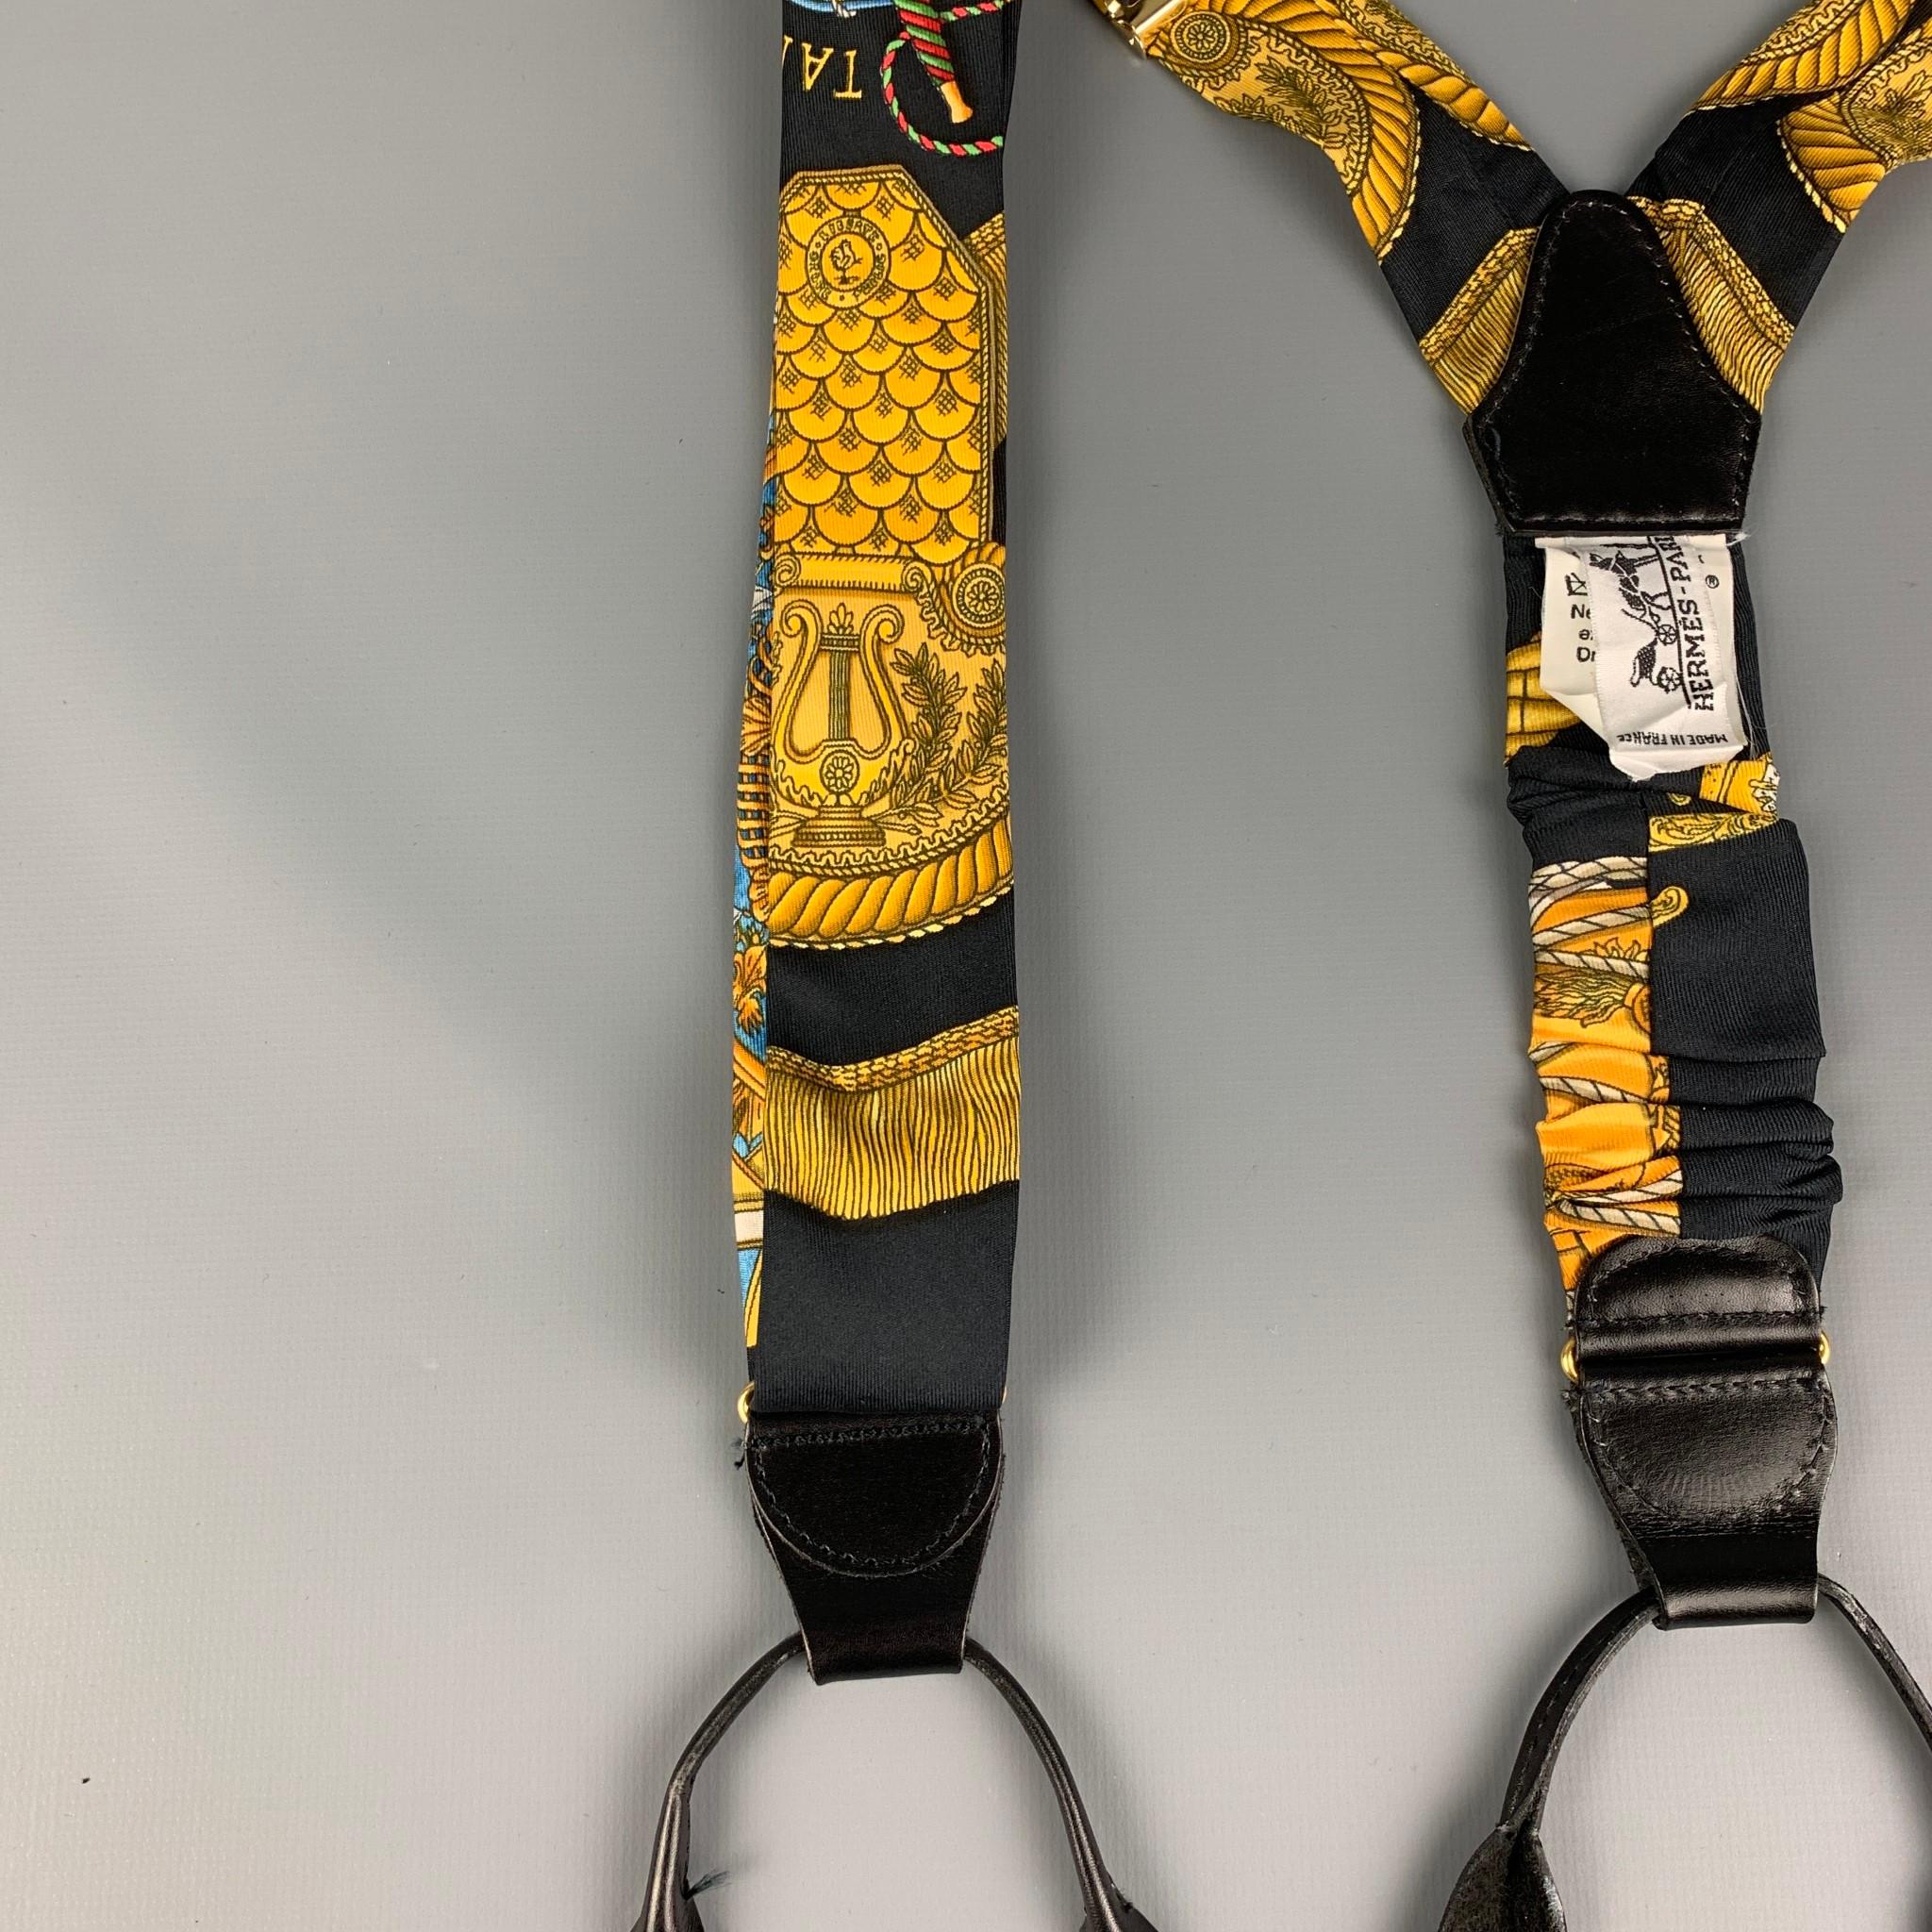 HERMES suspenders comes in a black & gold print  silk featuring a adjustable fit, black leather trim, and includes trouser buttons. Made in France.

Very Good Pre-Owned Condition:

Measurements:

Width: 1.5 in.